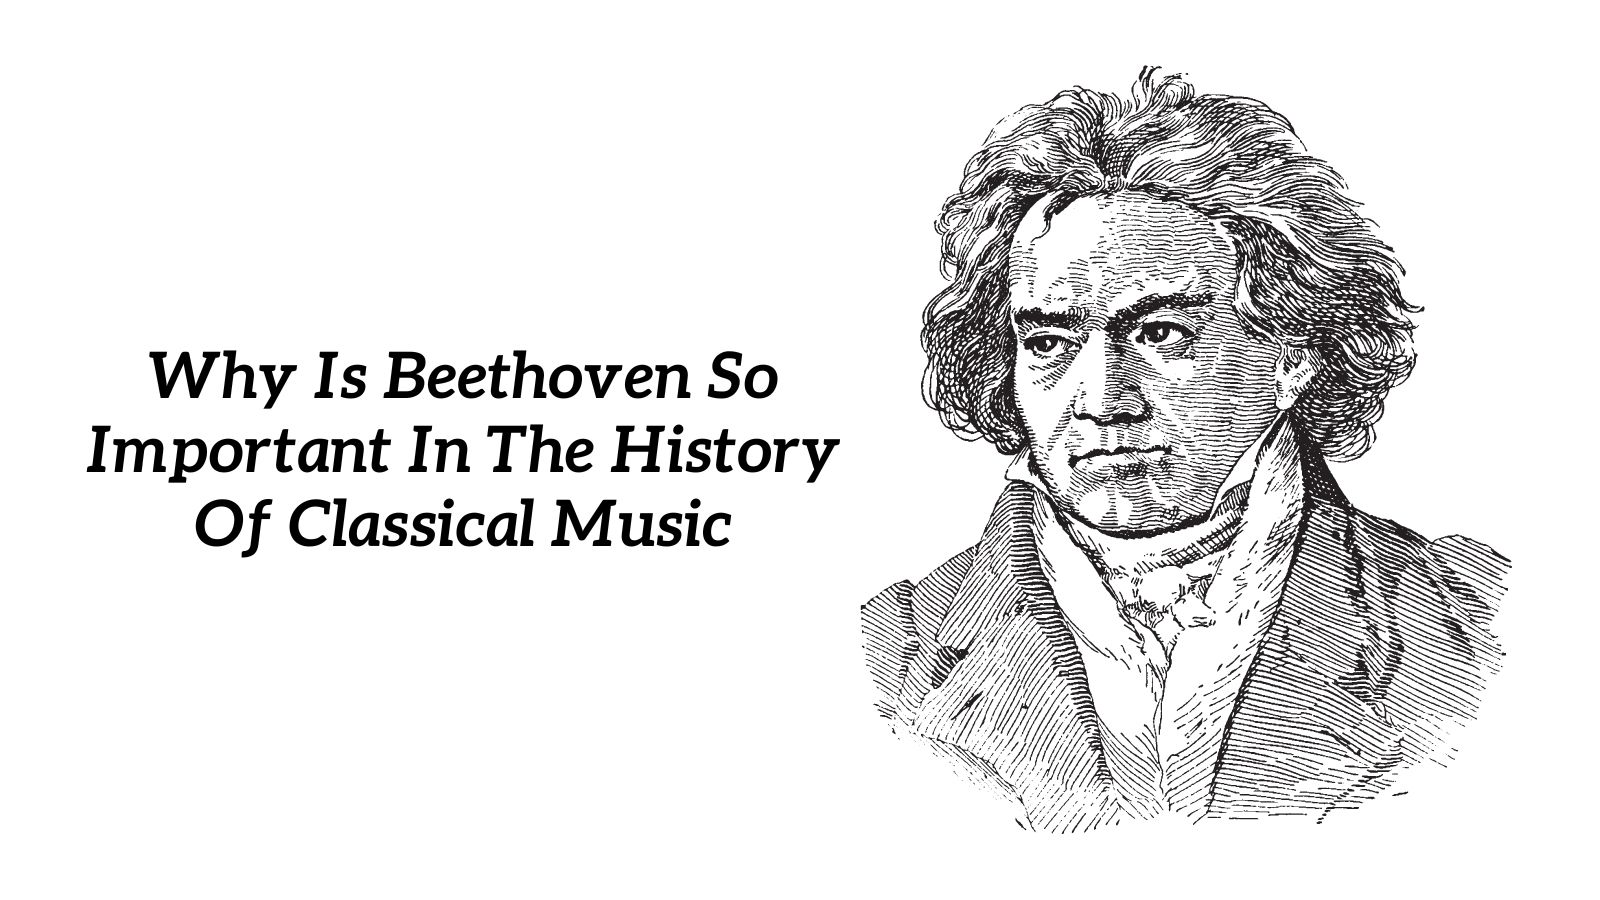 Why Is Beethoven So Important